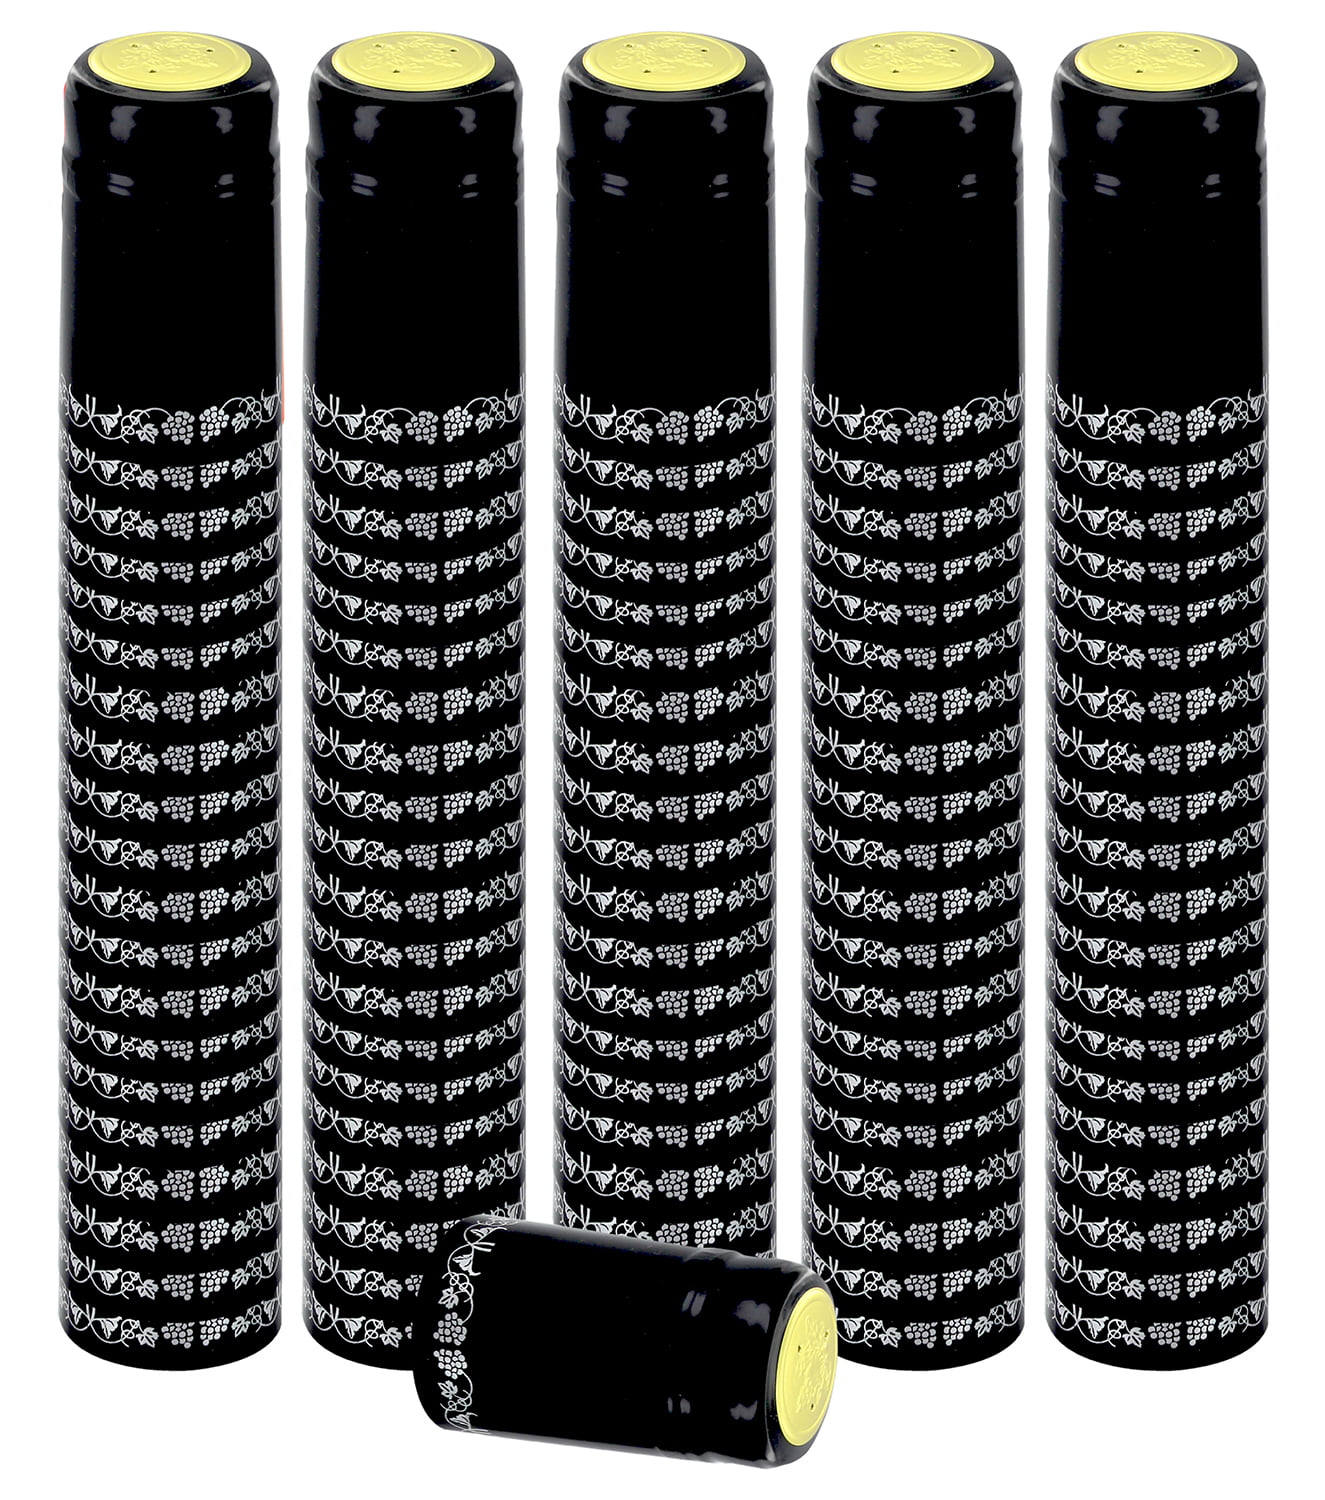 PVC Heat Capsules For Wine Bottles 100 SHRINK CAPSULES Silver With Silver Top 